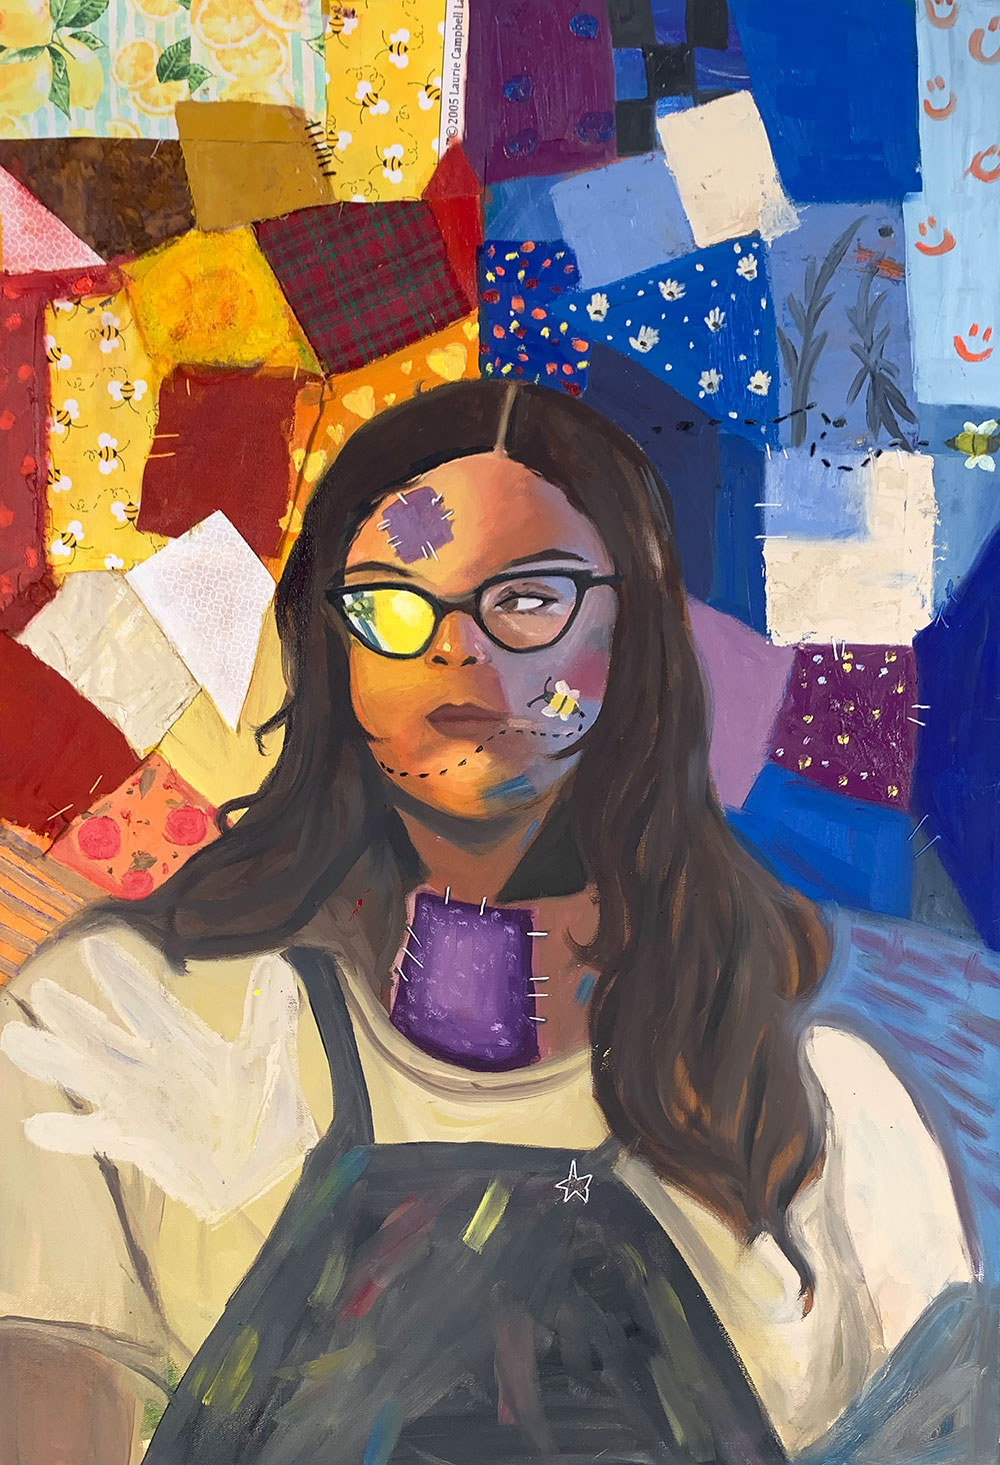 Colorful self portrait figurative painting - girl with brown hair and black glasses surrounded by various types of patterned material. 